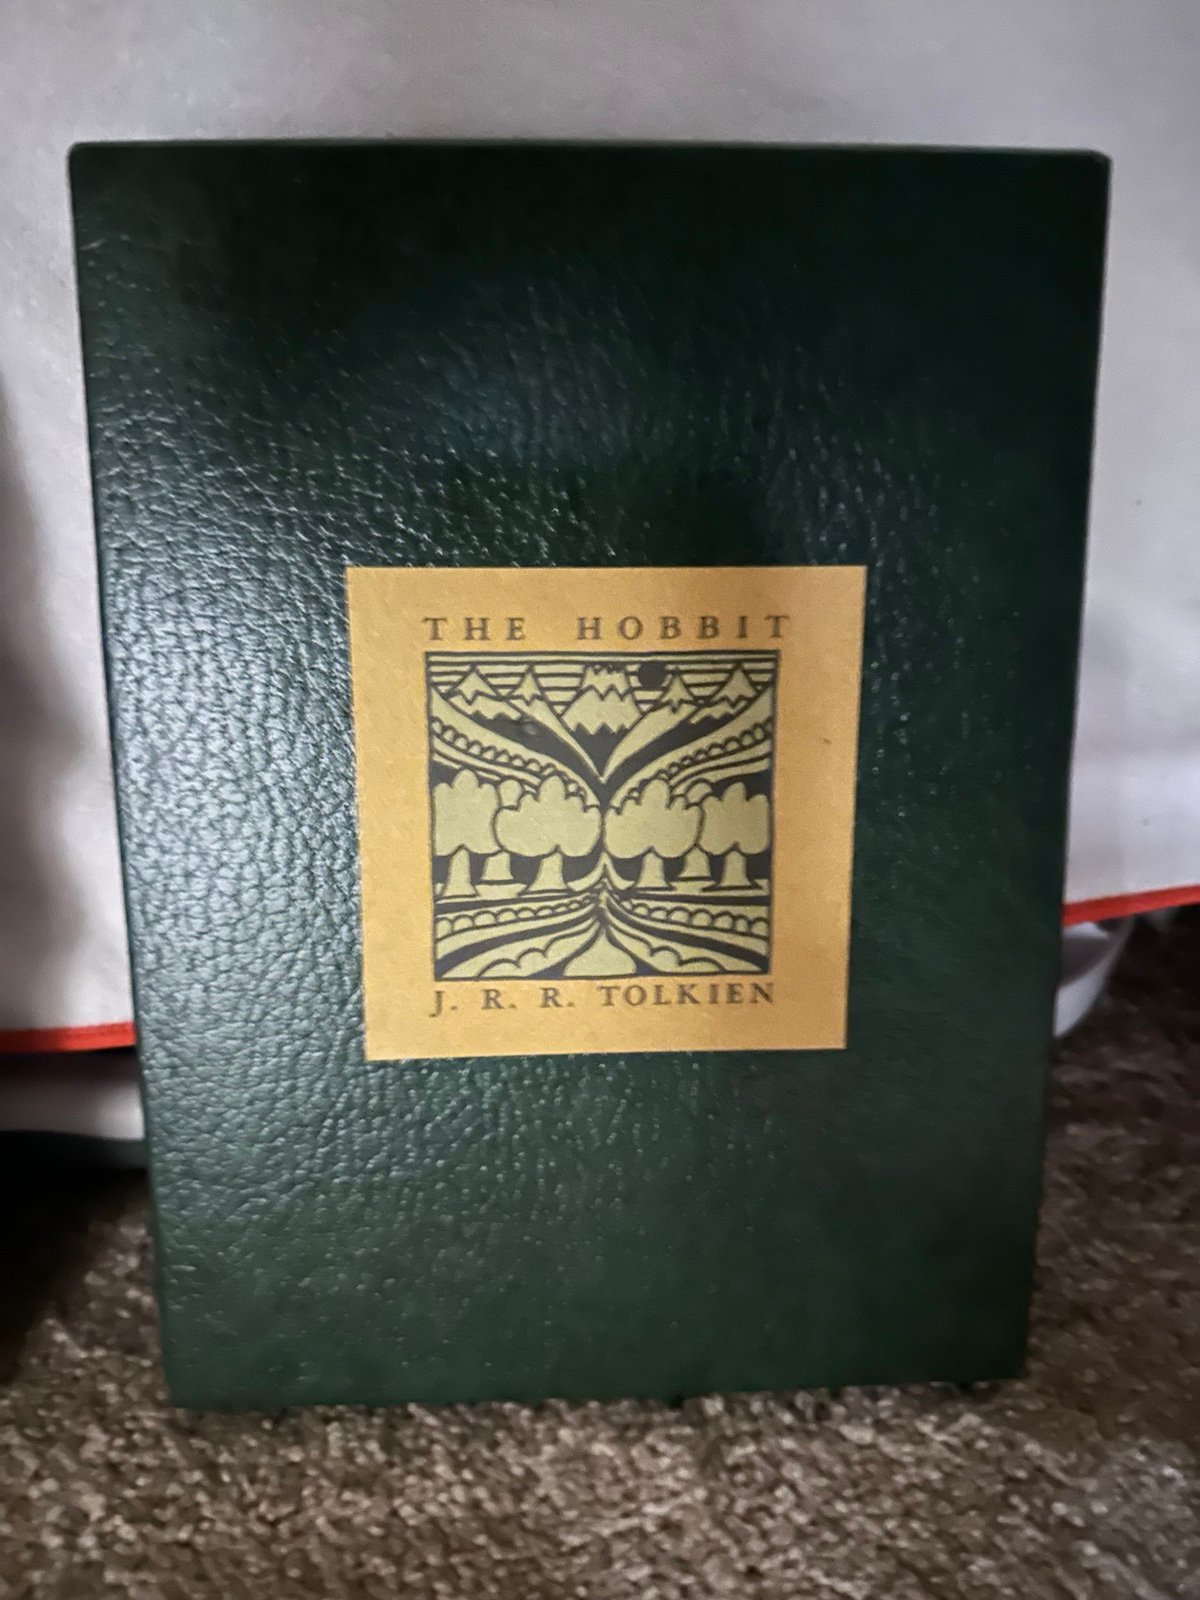 1966 The Hobbit Collectors Edition By Tolkien Estimate: $100 - $300 9flYbvinD